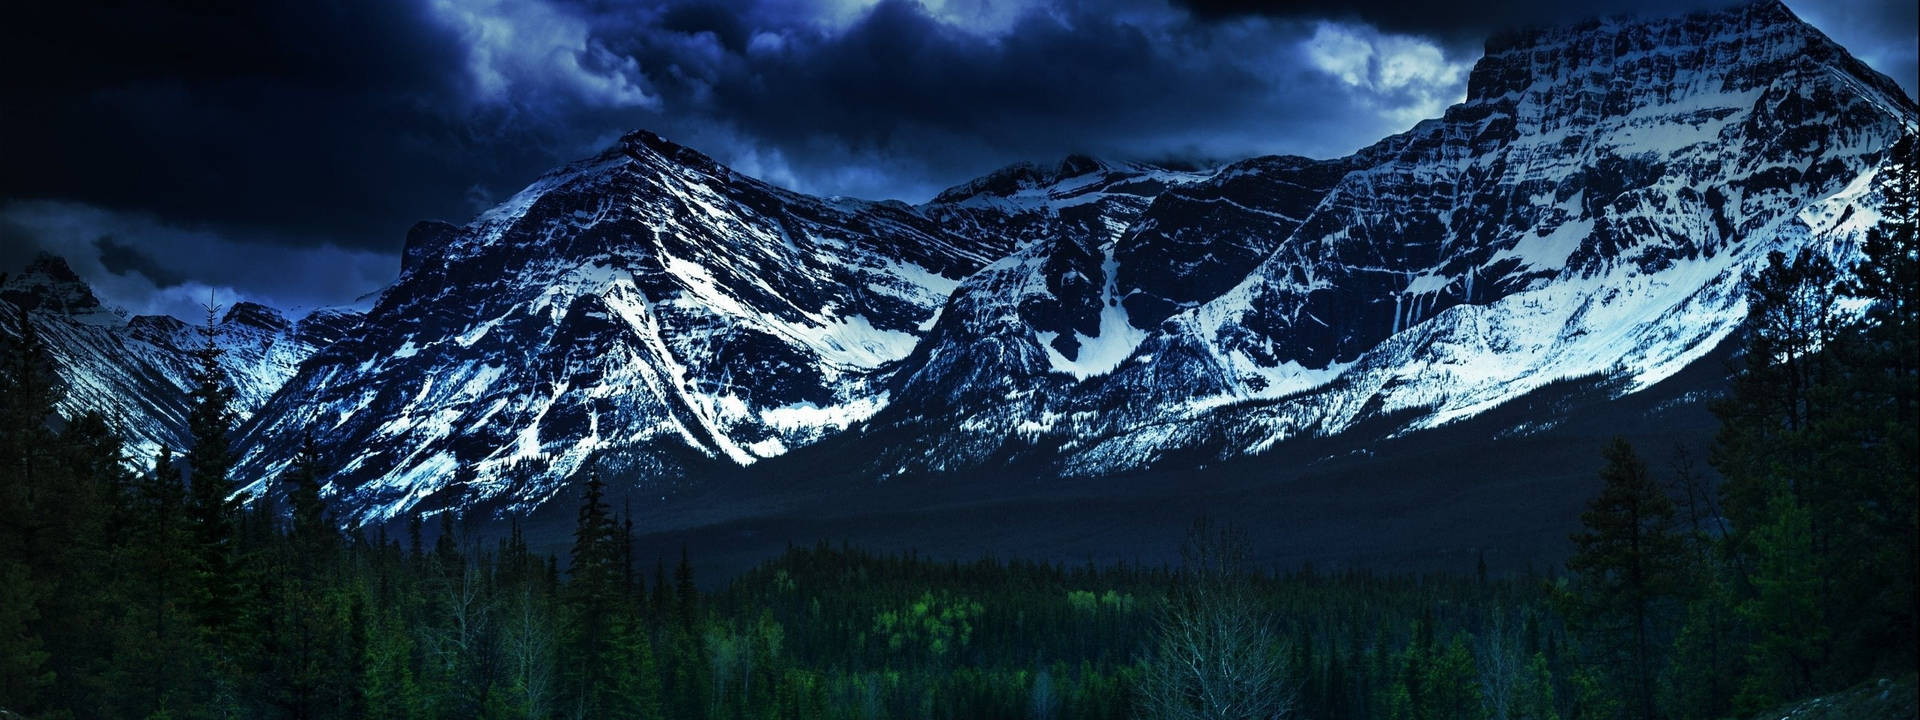 Snow-Capped Peaks Peeking Through A Majestic Forest Wallpaper